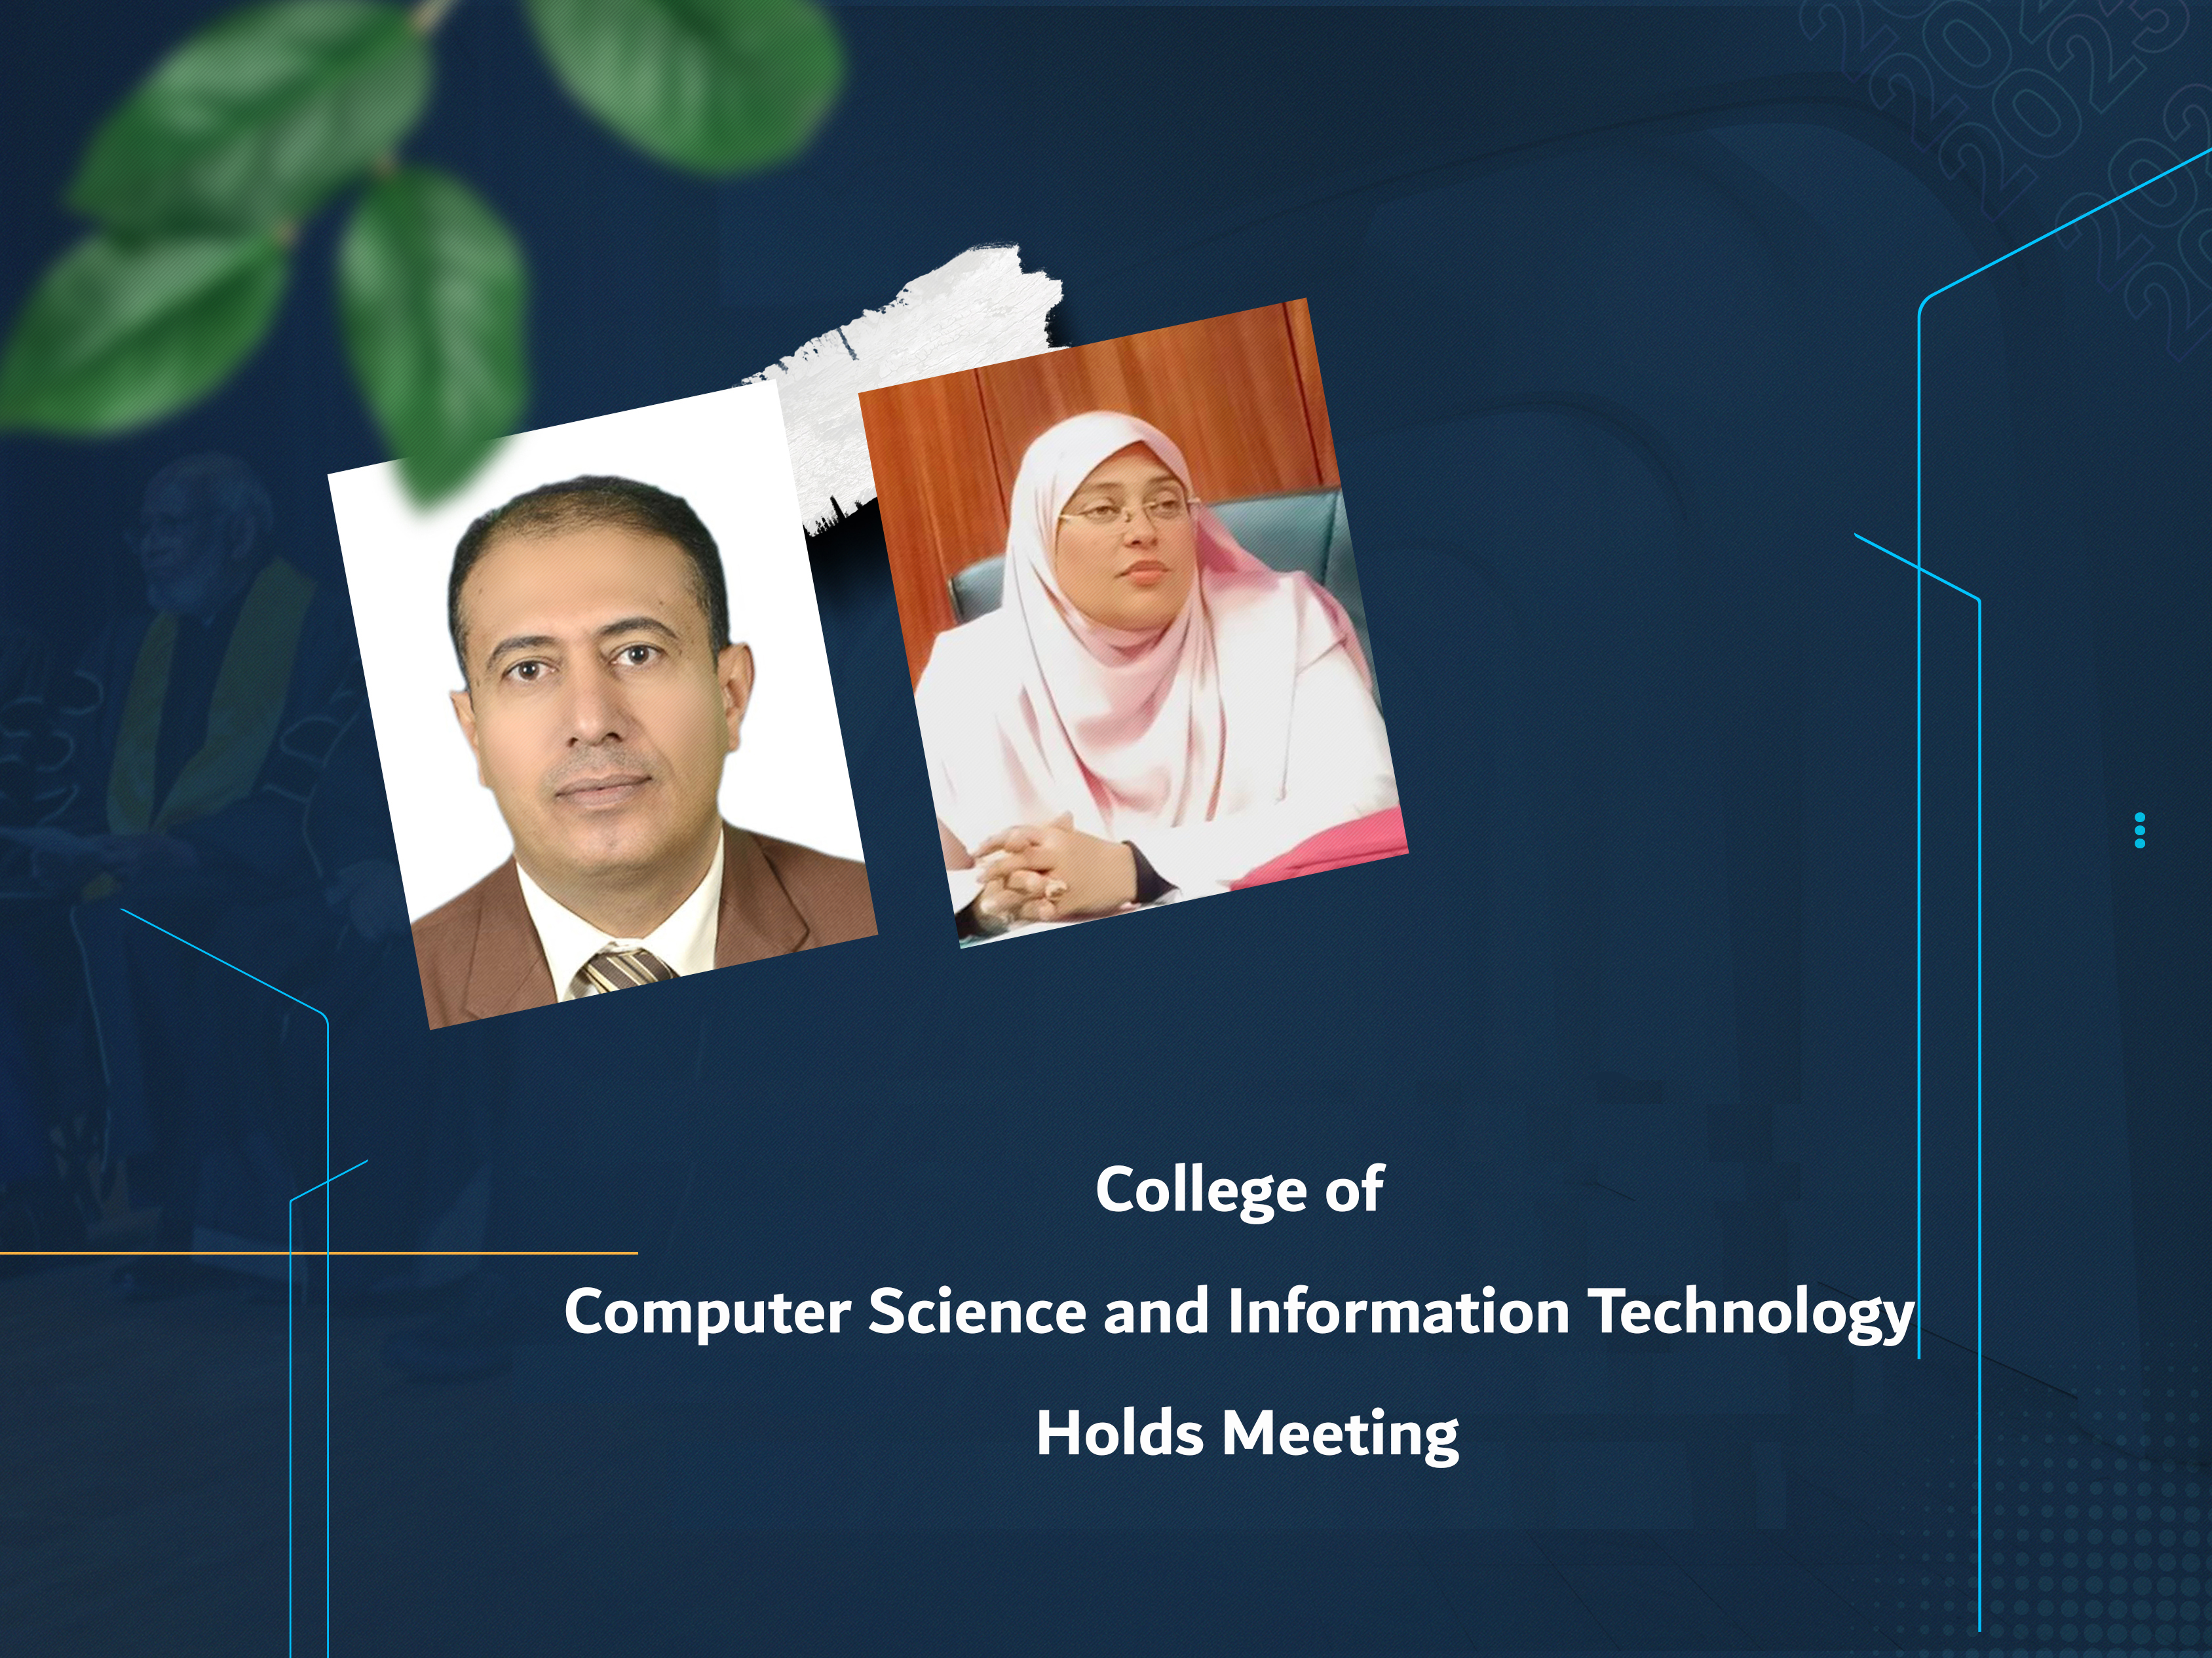 College of Computer Science and Information Technology Holds Meeting